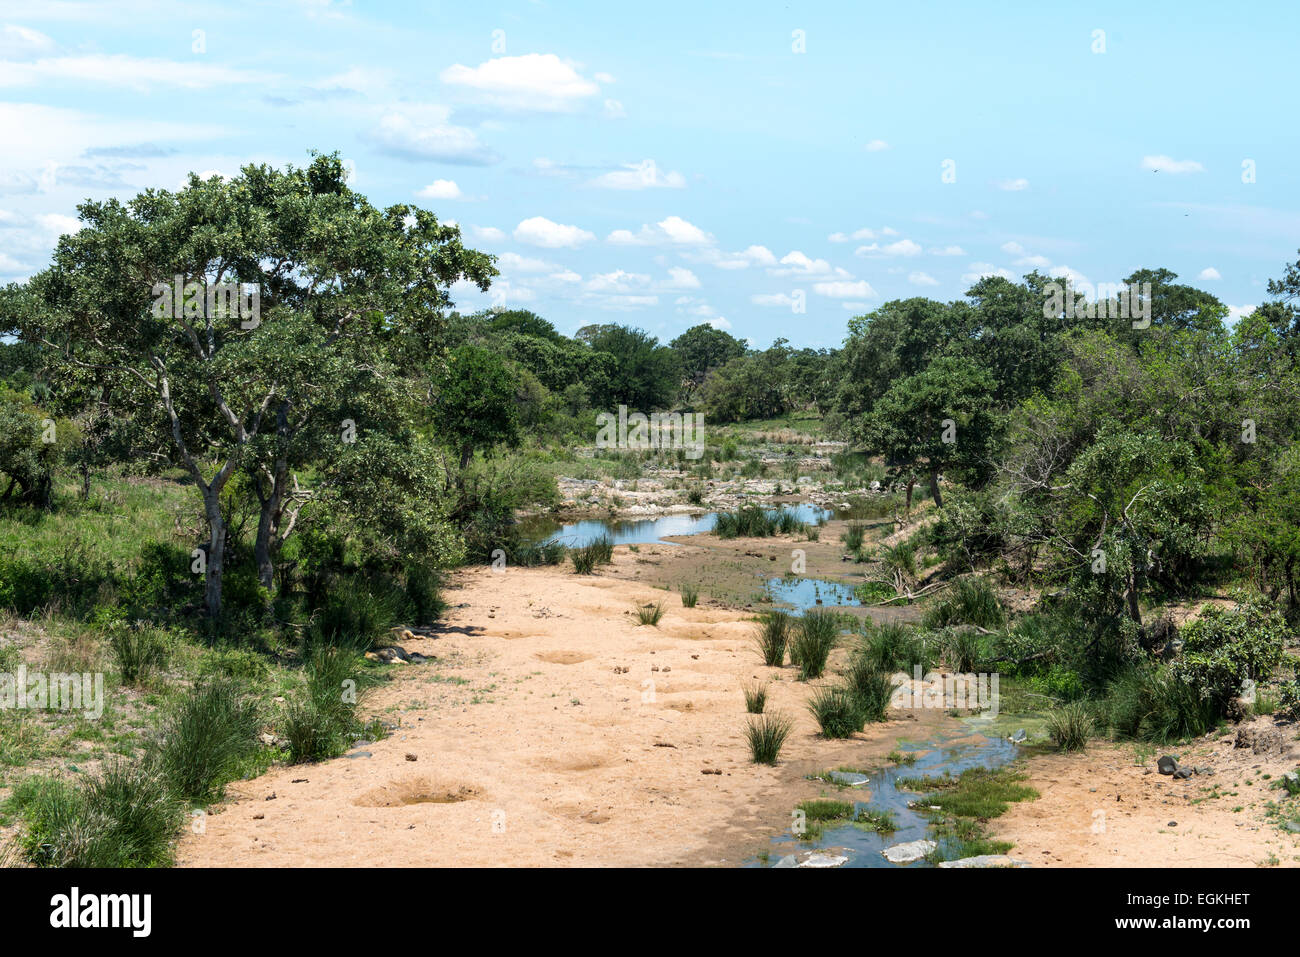 Dry sandy riverbed with trees, Kruger National Park, South Africa Stock Photo